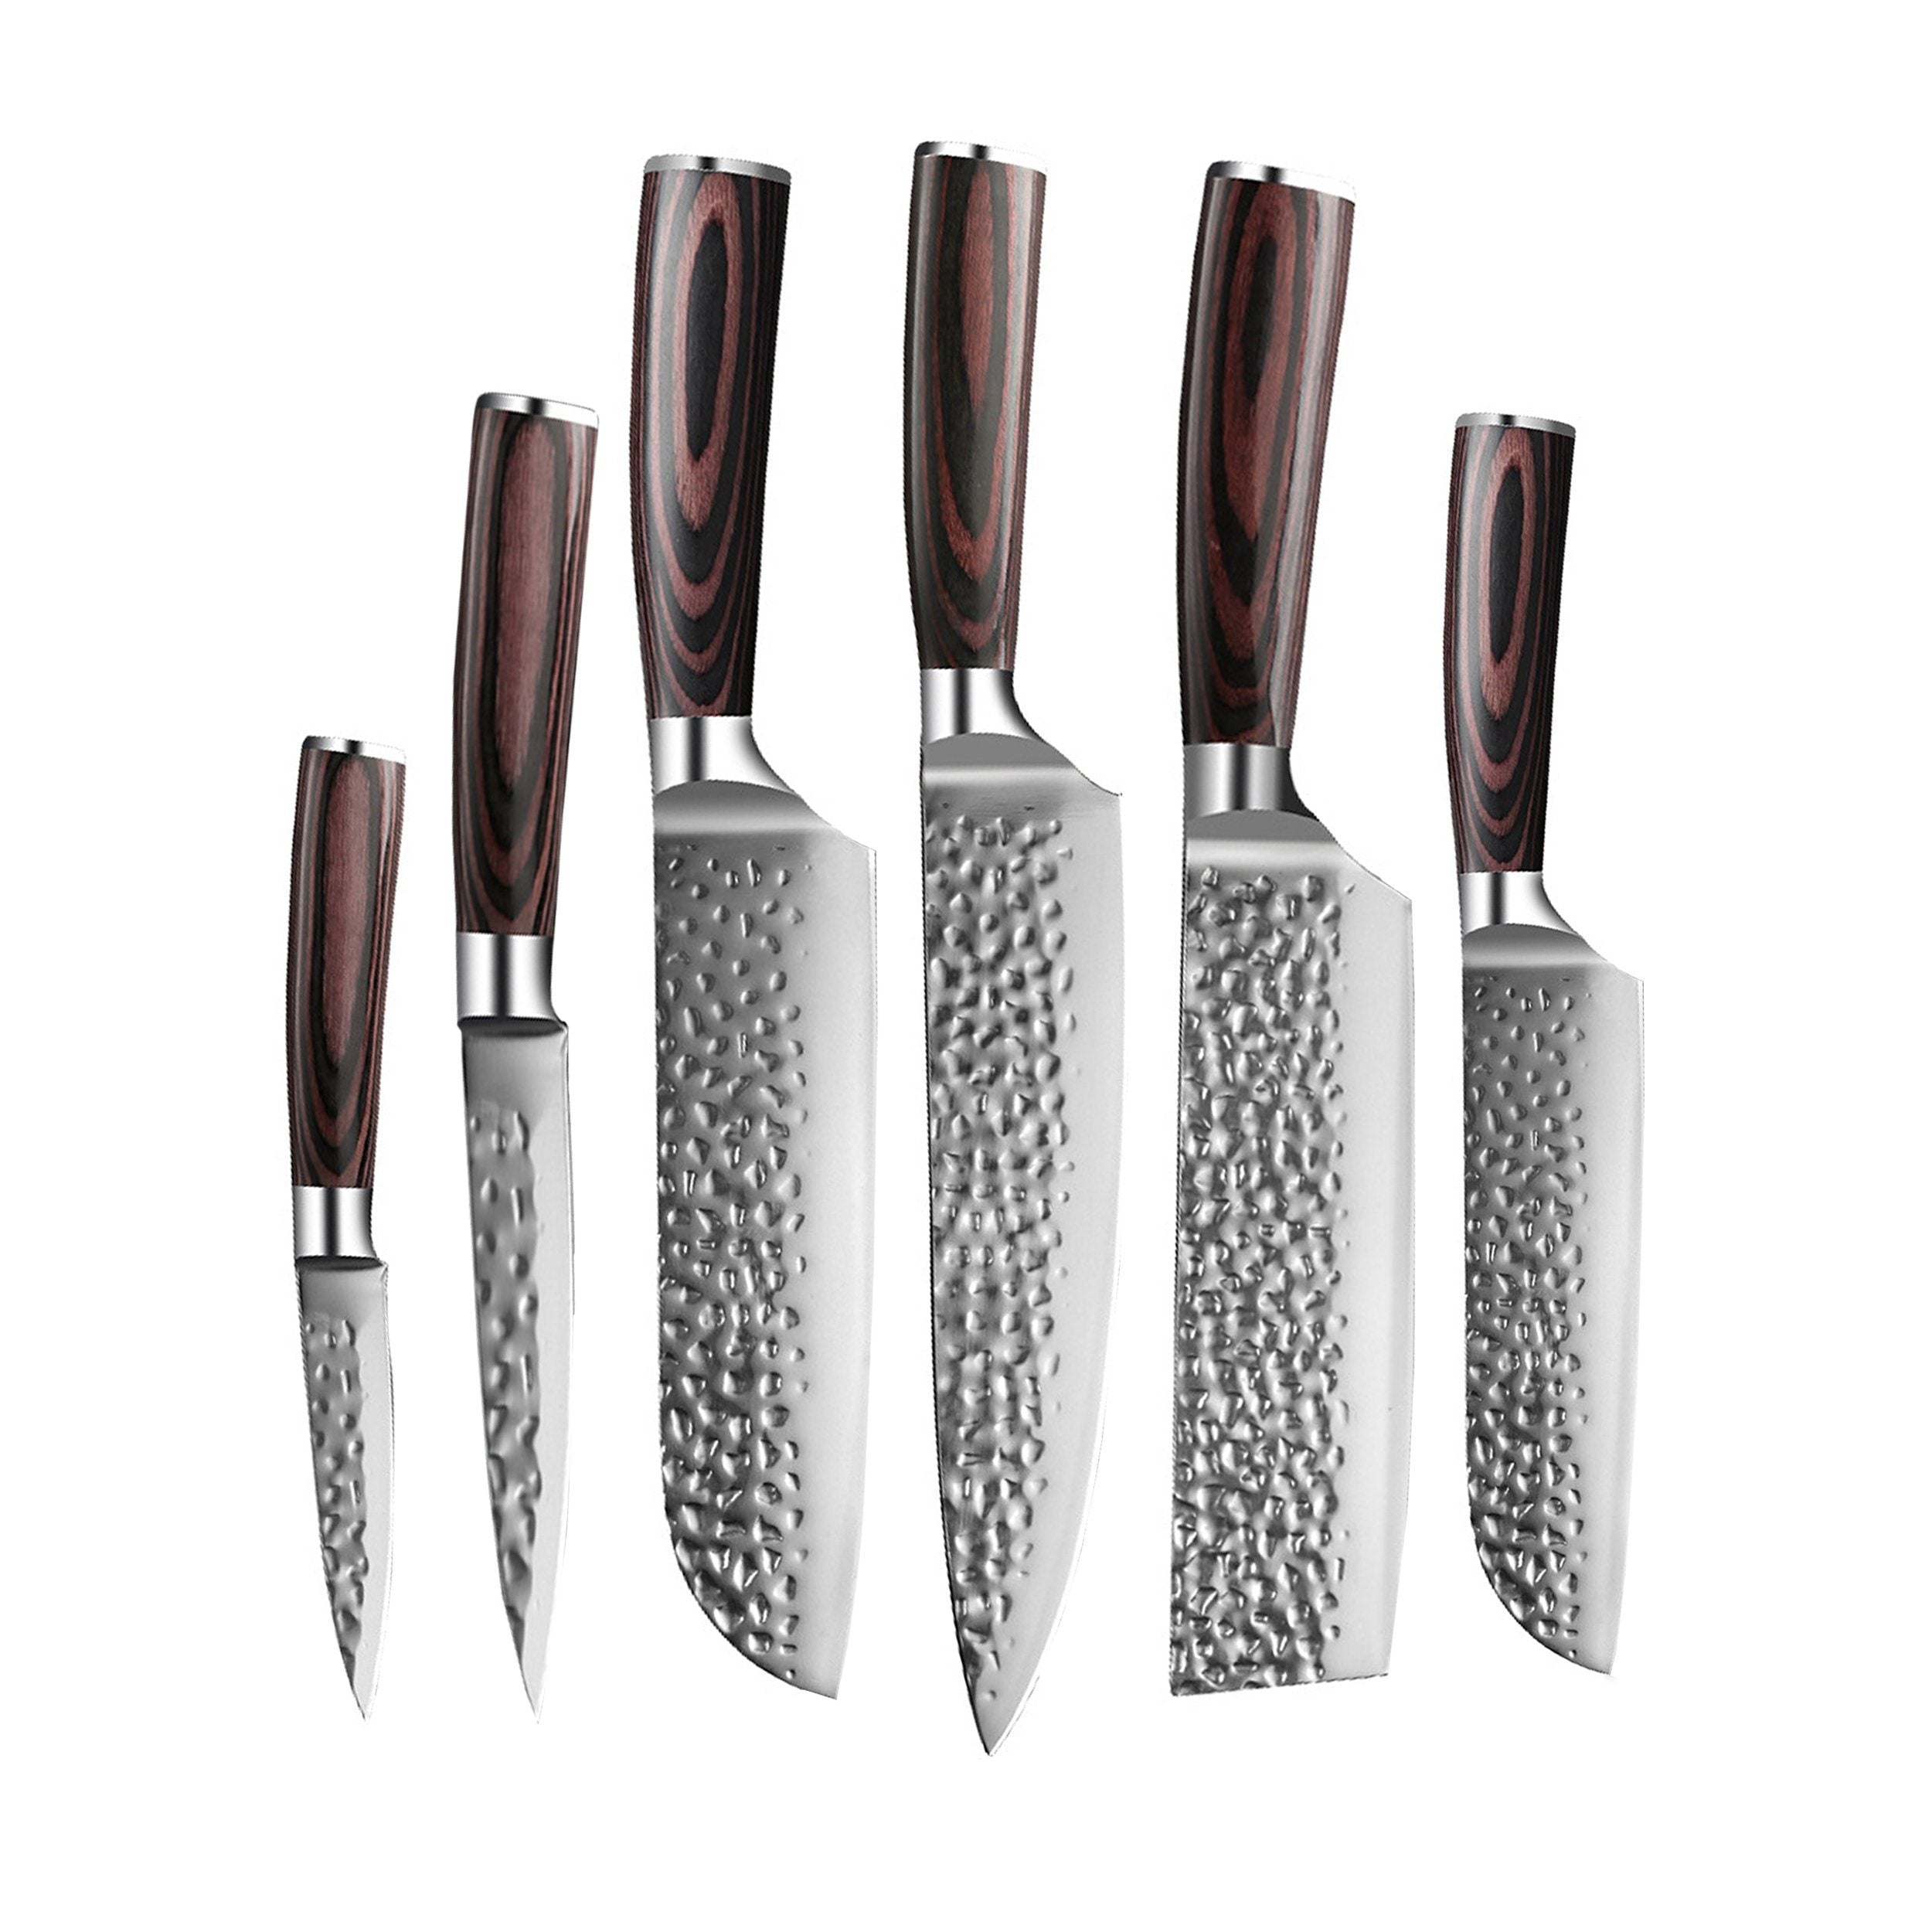 Müller Koch 6 PCS Stainless Steel with Nonstick Coating Knife Set (Red)